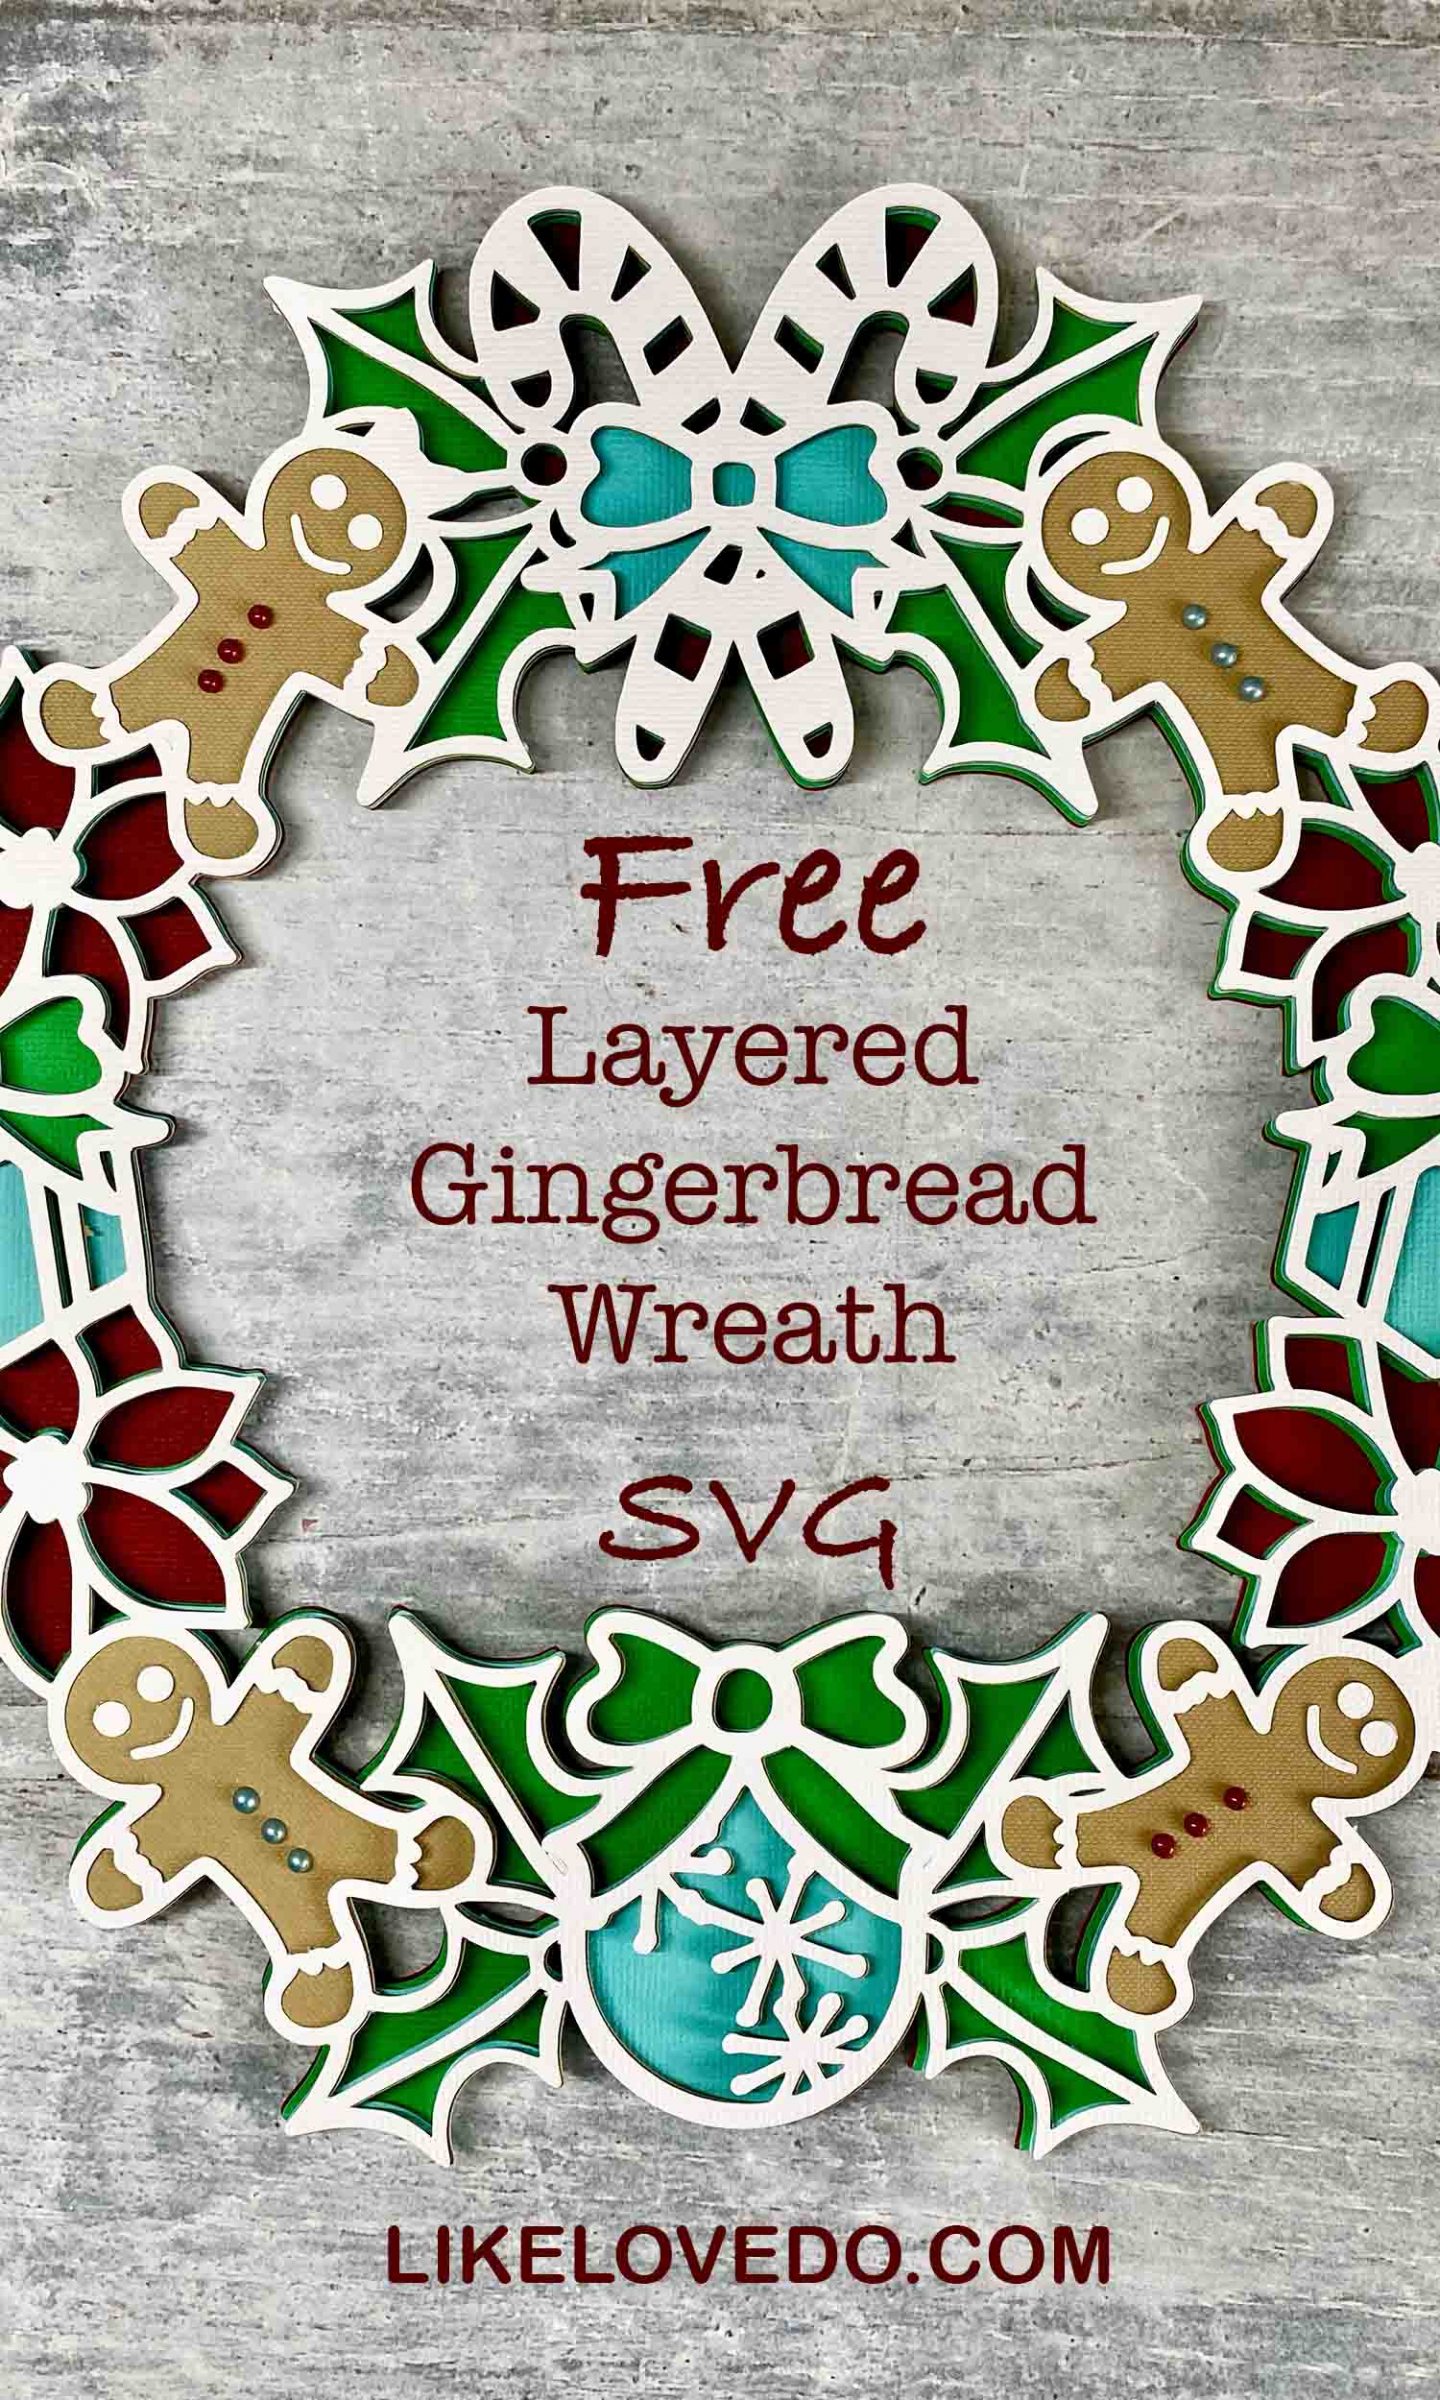 Layered Gingerbread Wreath SVG Image of cut it Gingerbread wreath n 5 colours of card